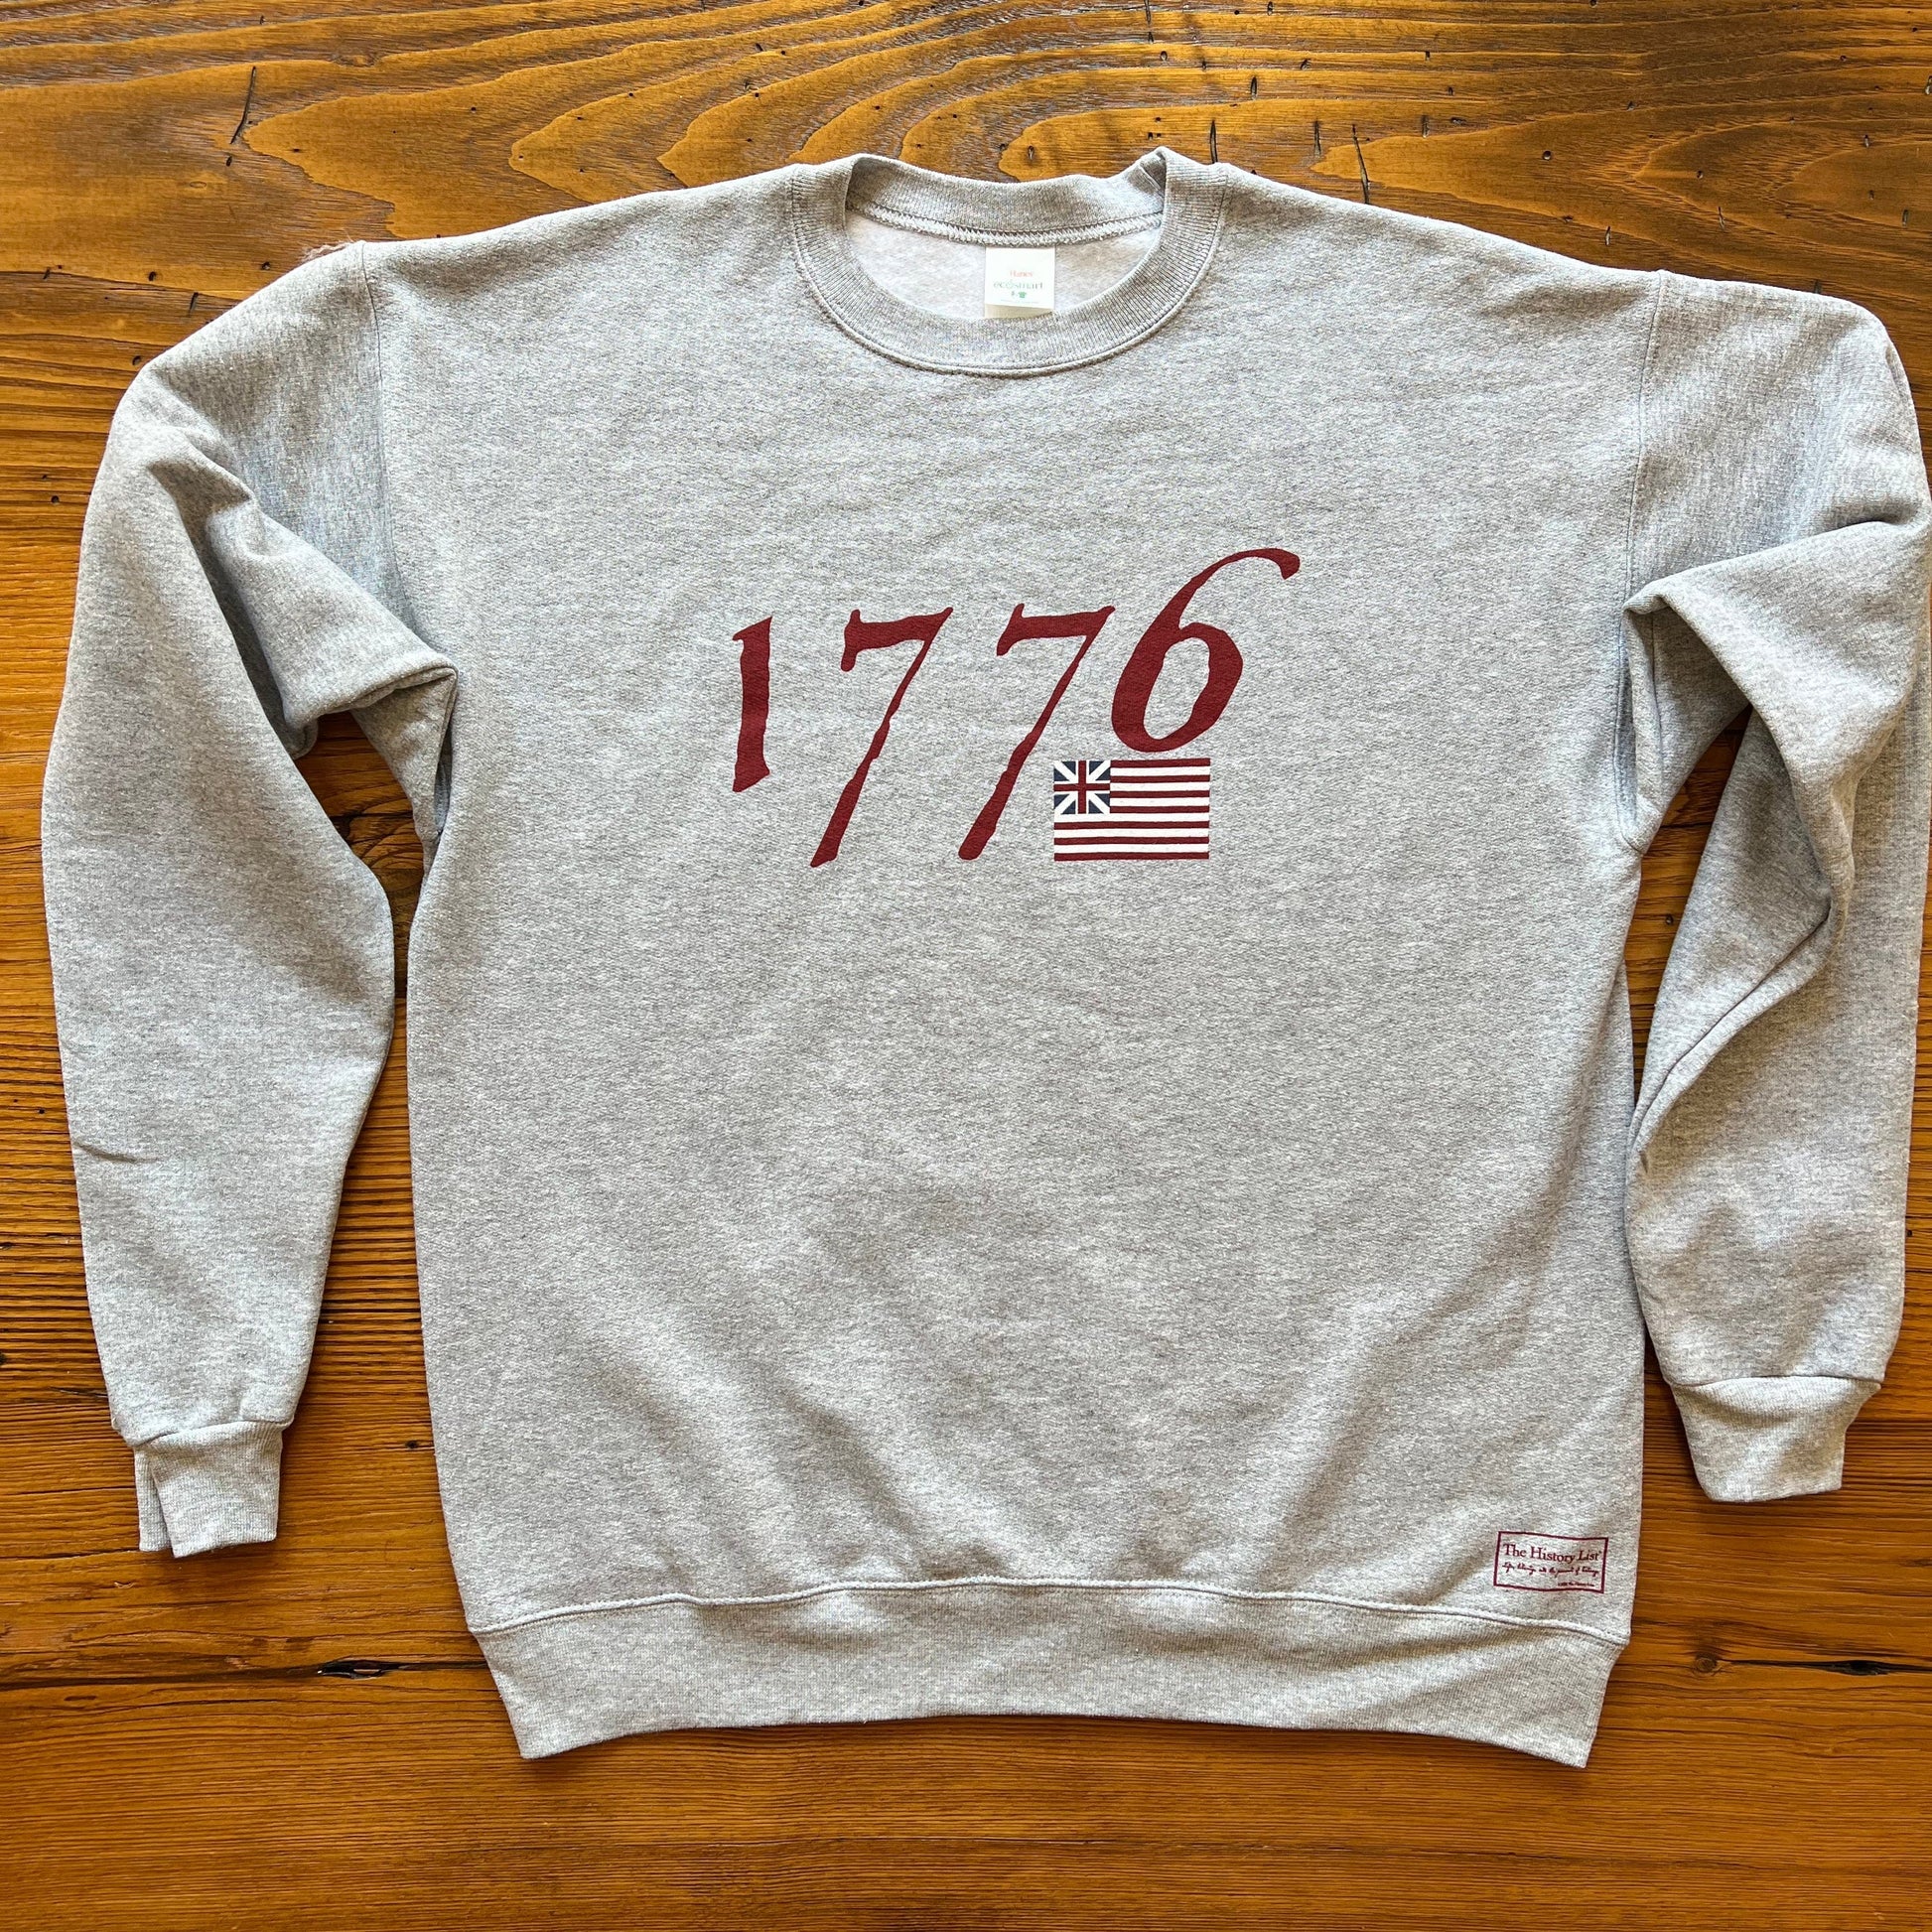 "1776 with Our Nation's First Flag" Crewneck sweatshirt from The History List store